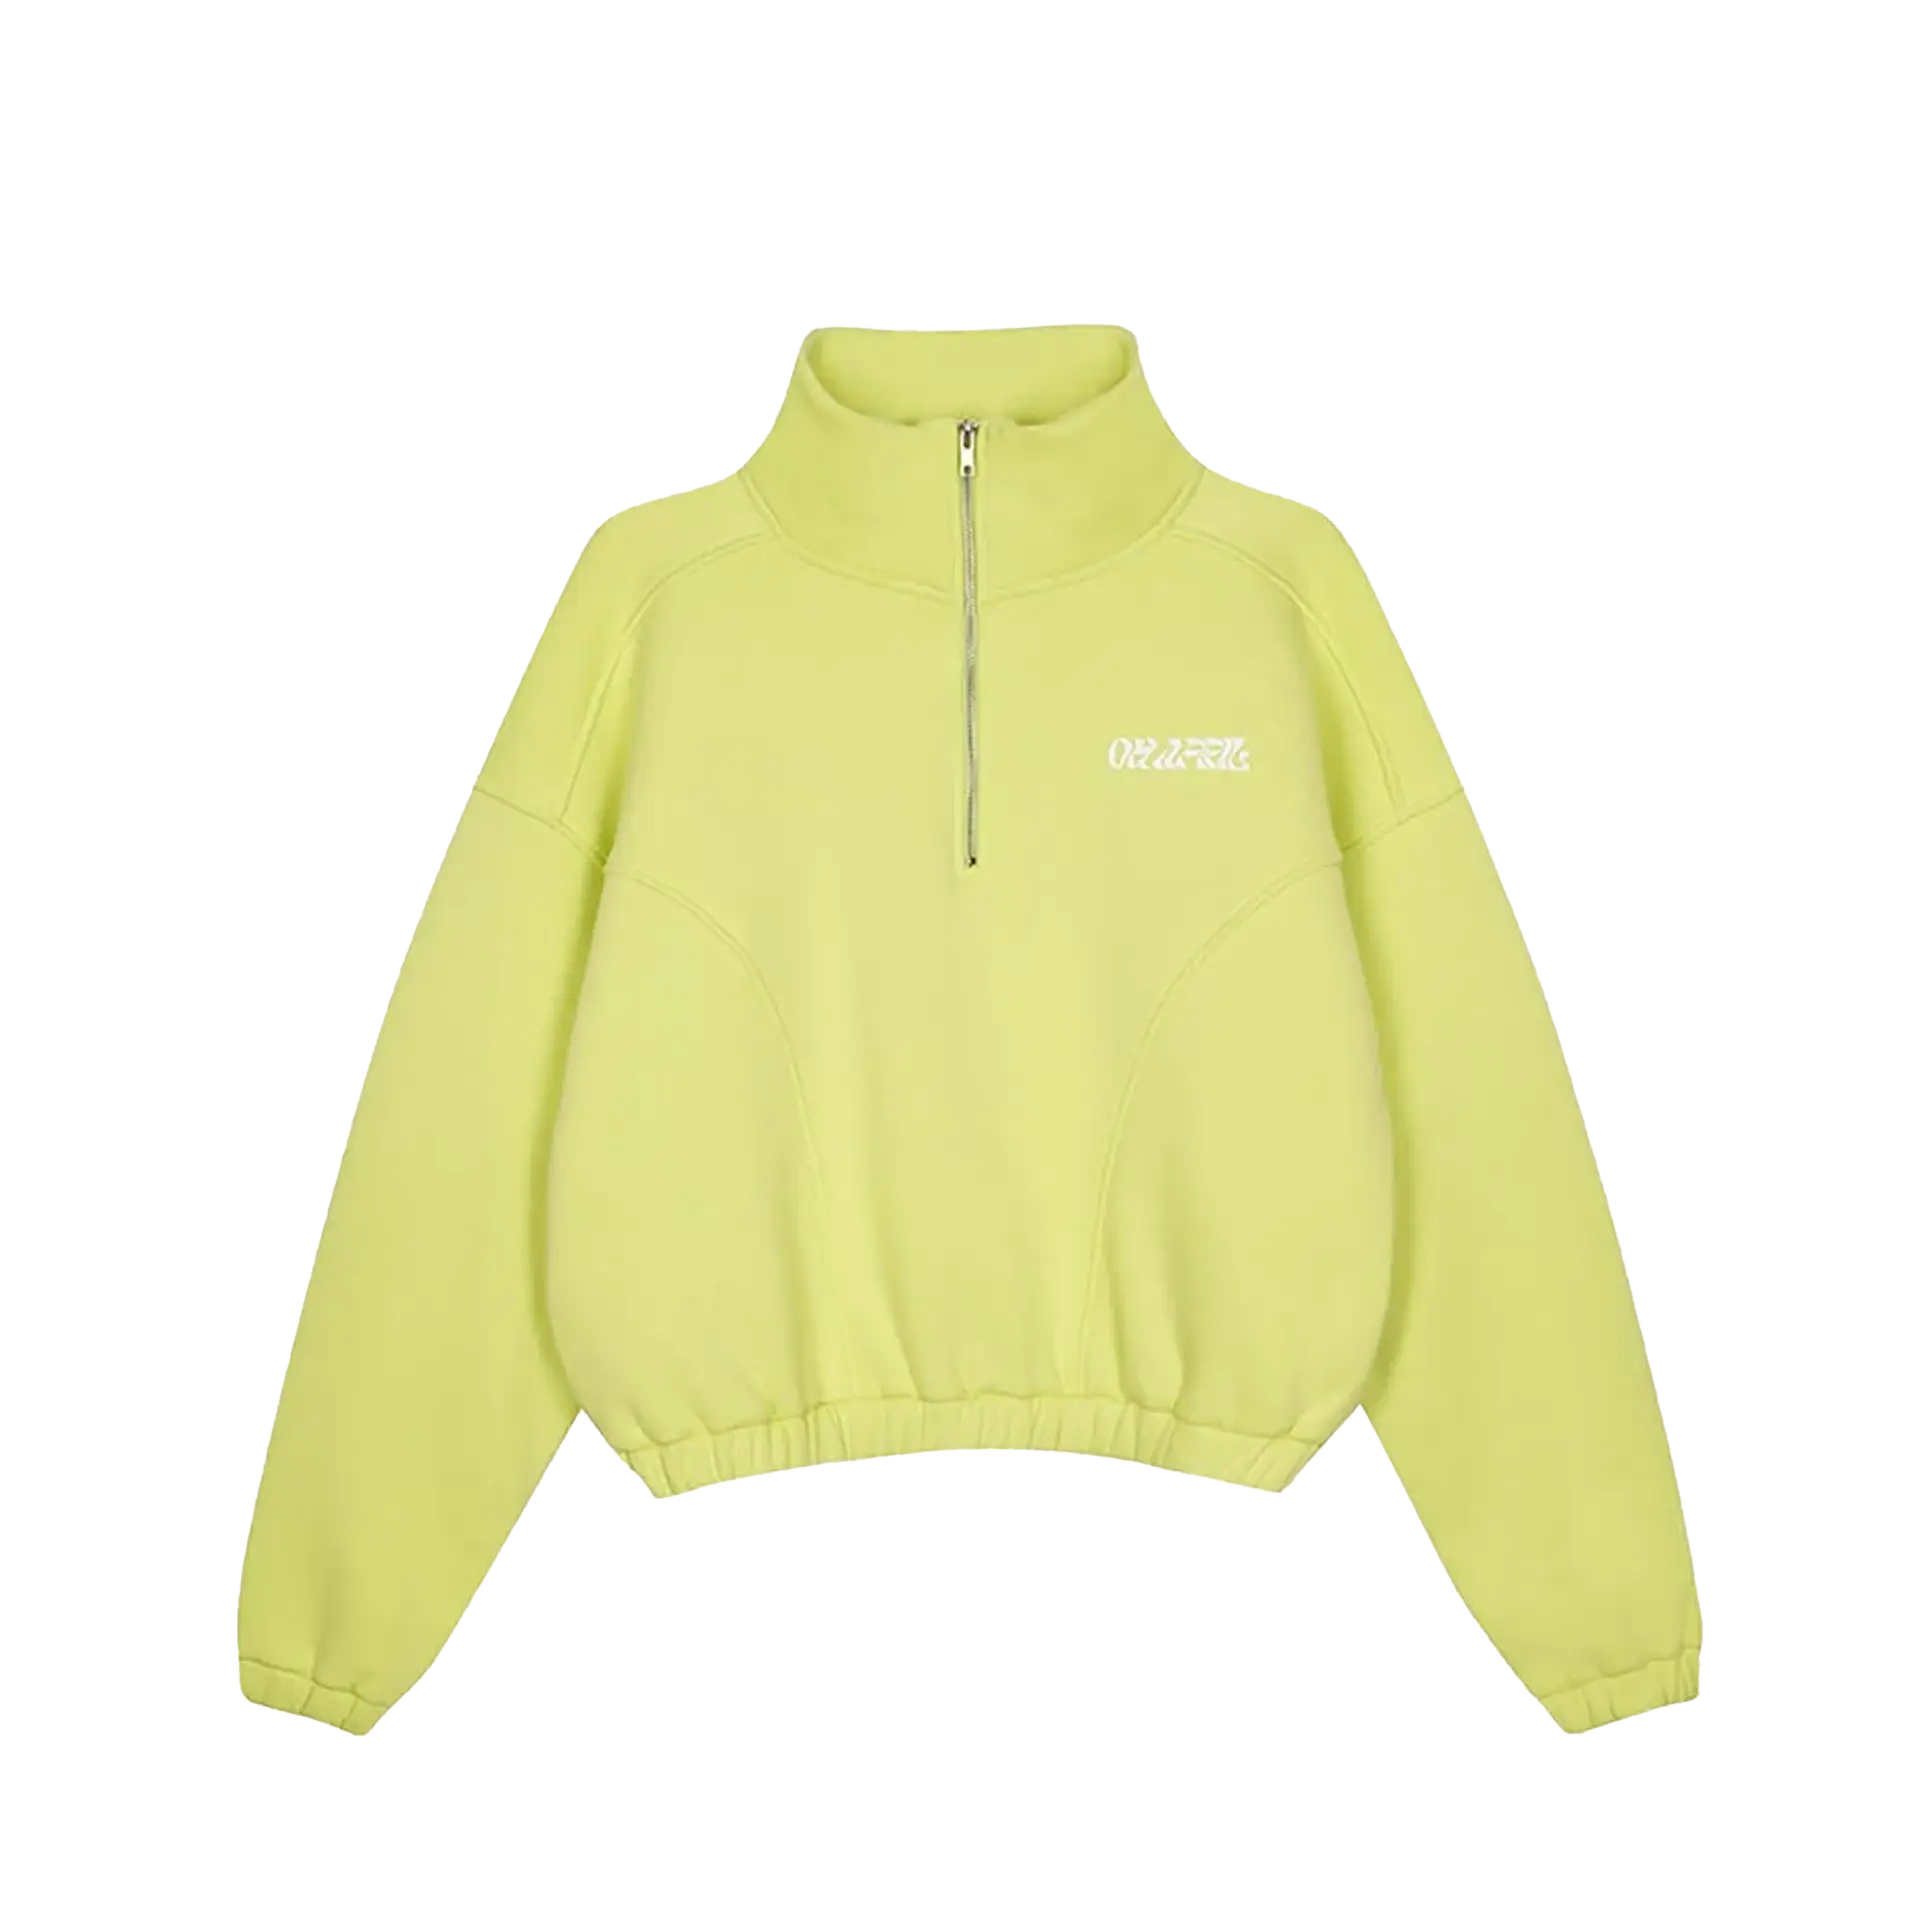 Oh April 'Evie' Zipper Sweater Lime